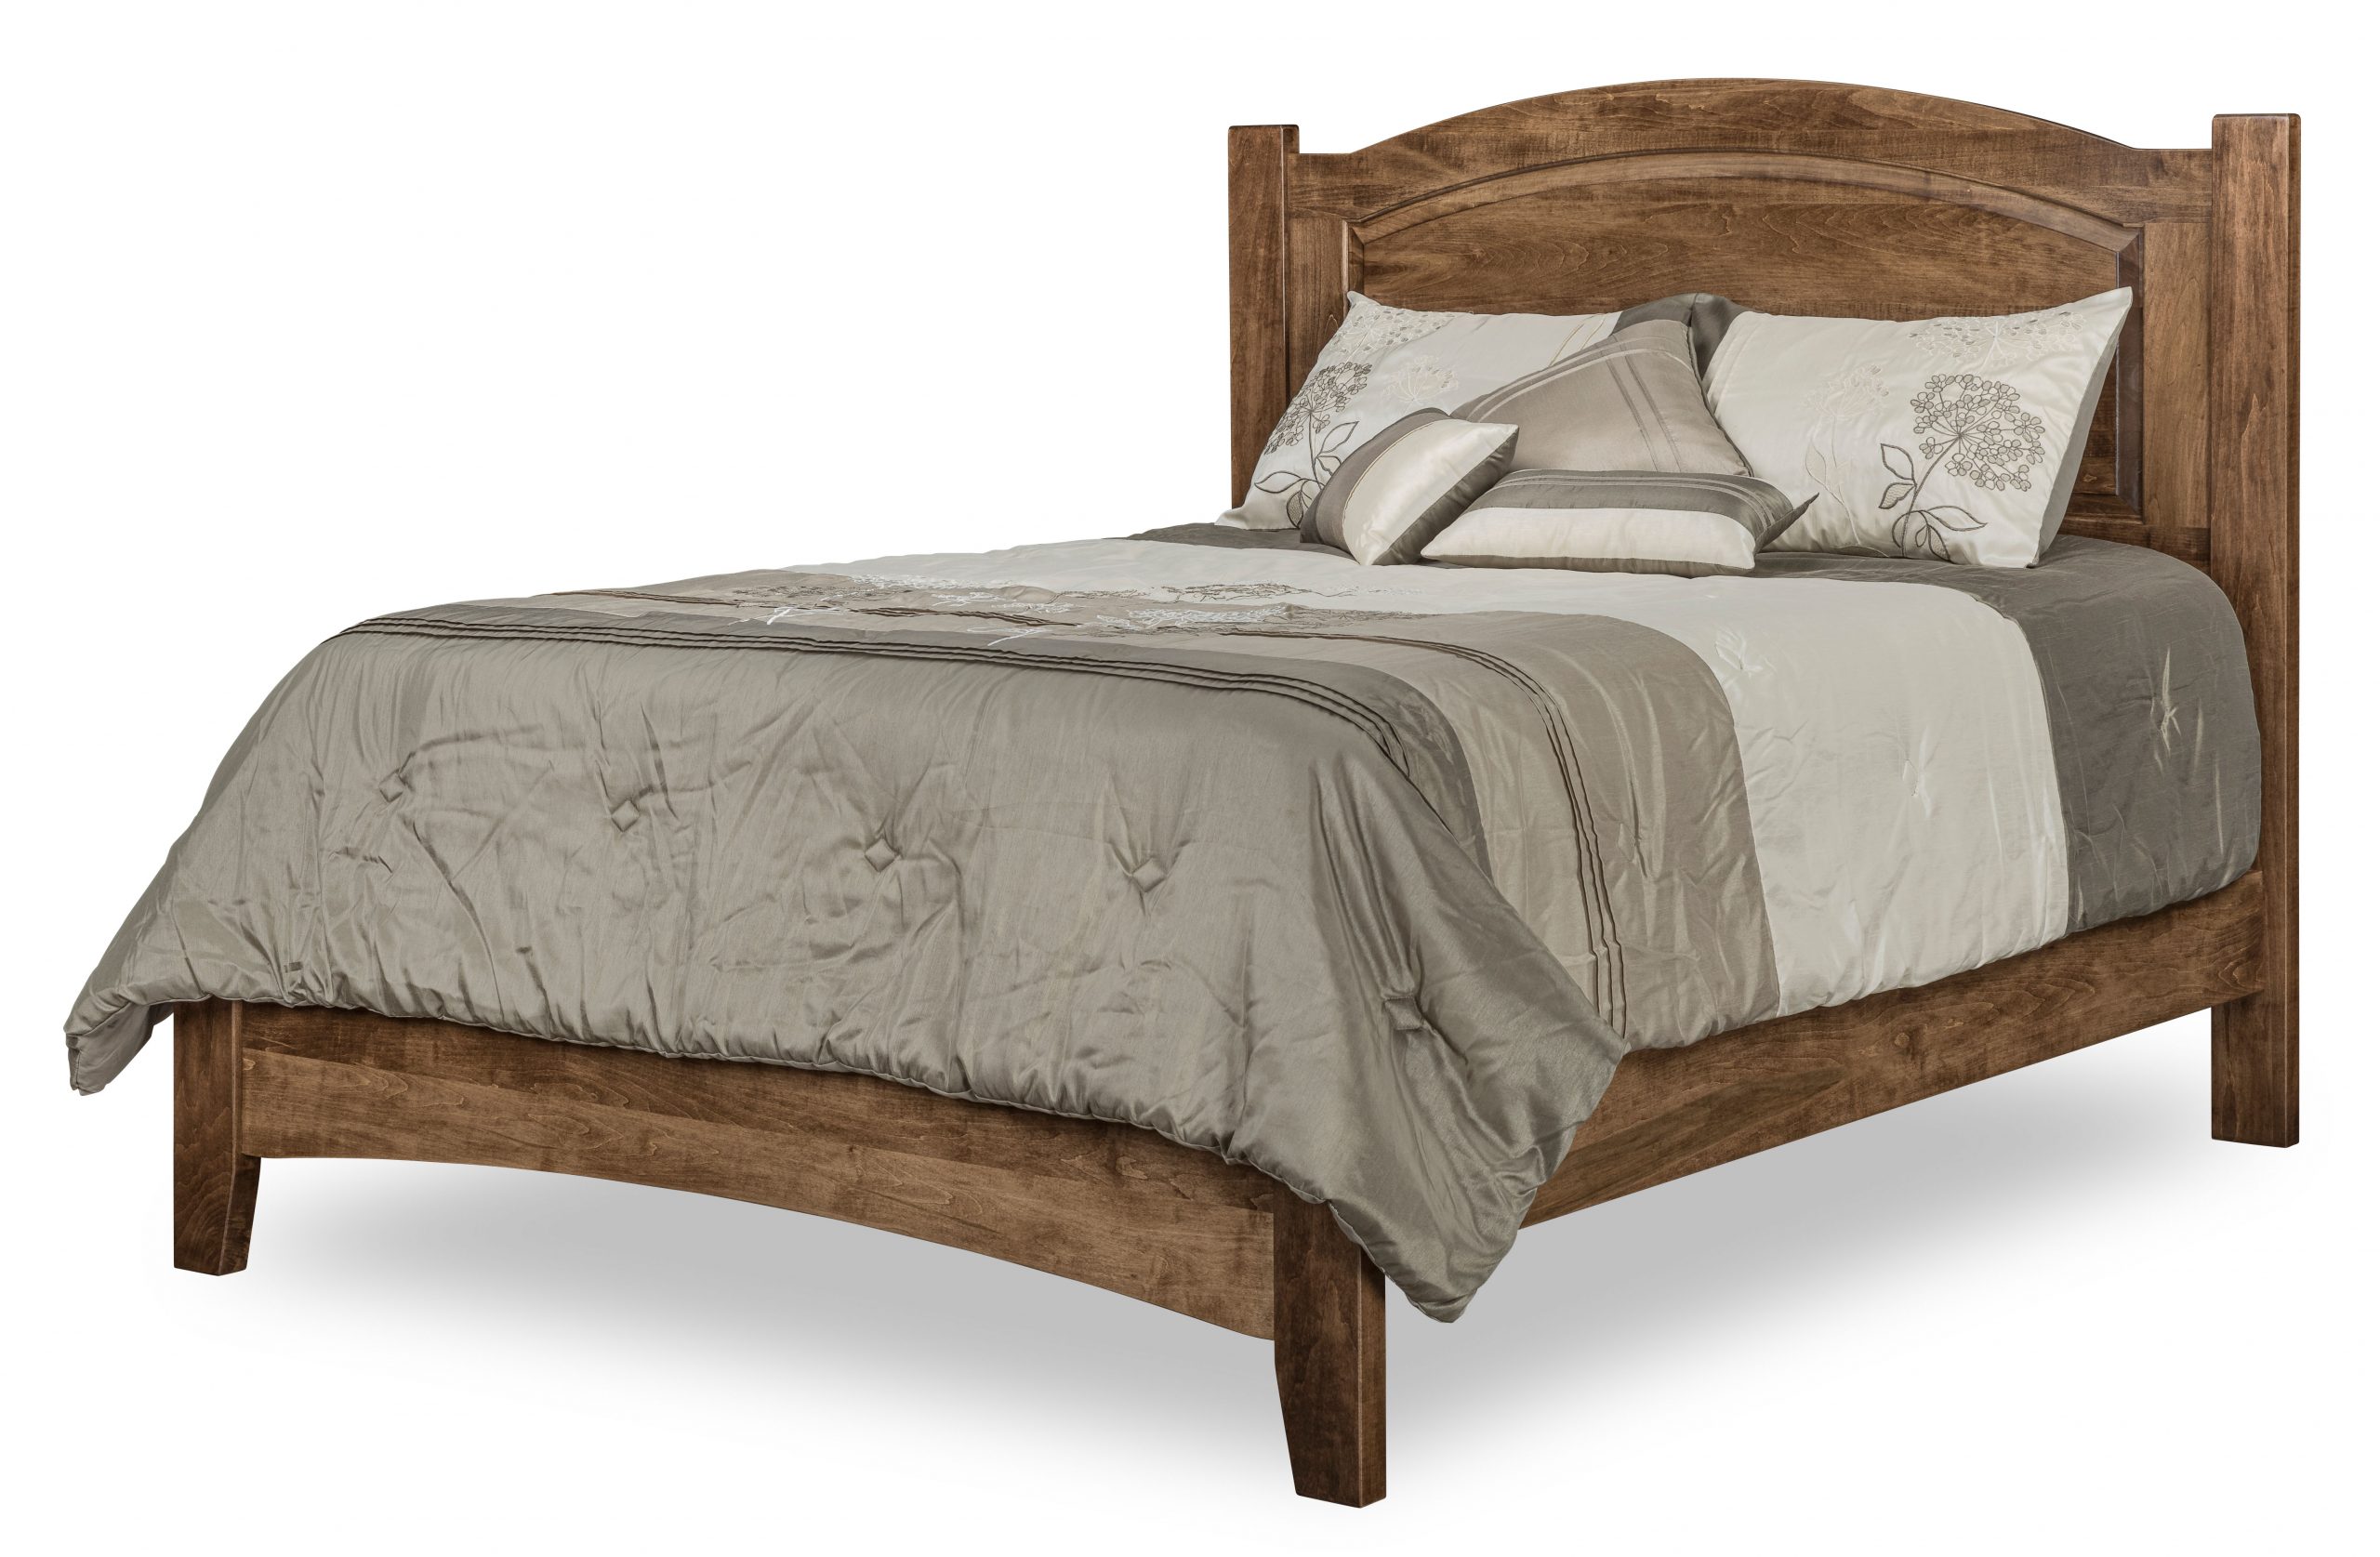 Carlston Bed Amish Solid Wood Beds, Amish Made Bed Frames